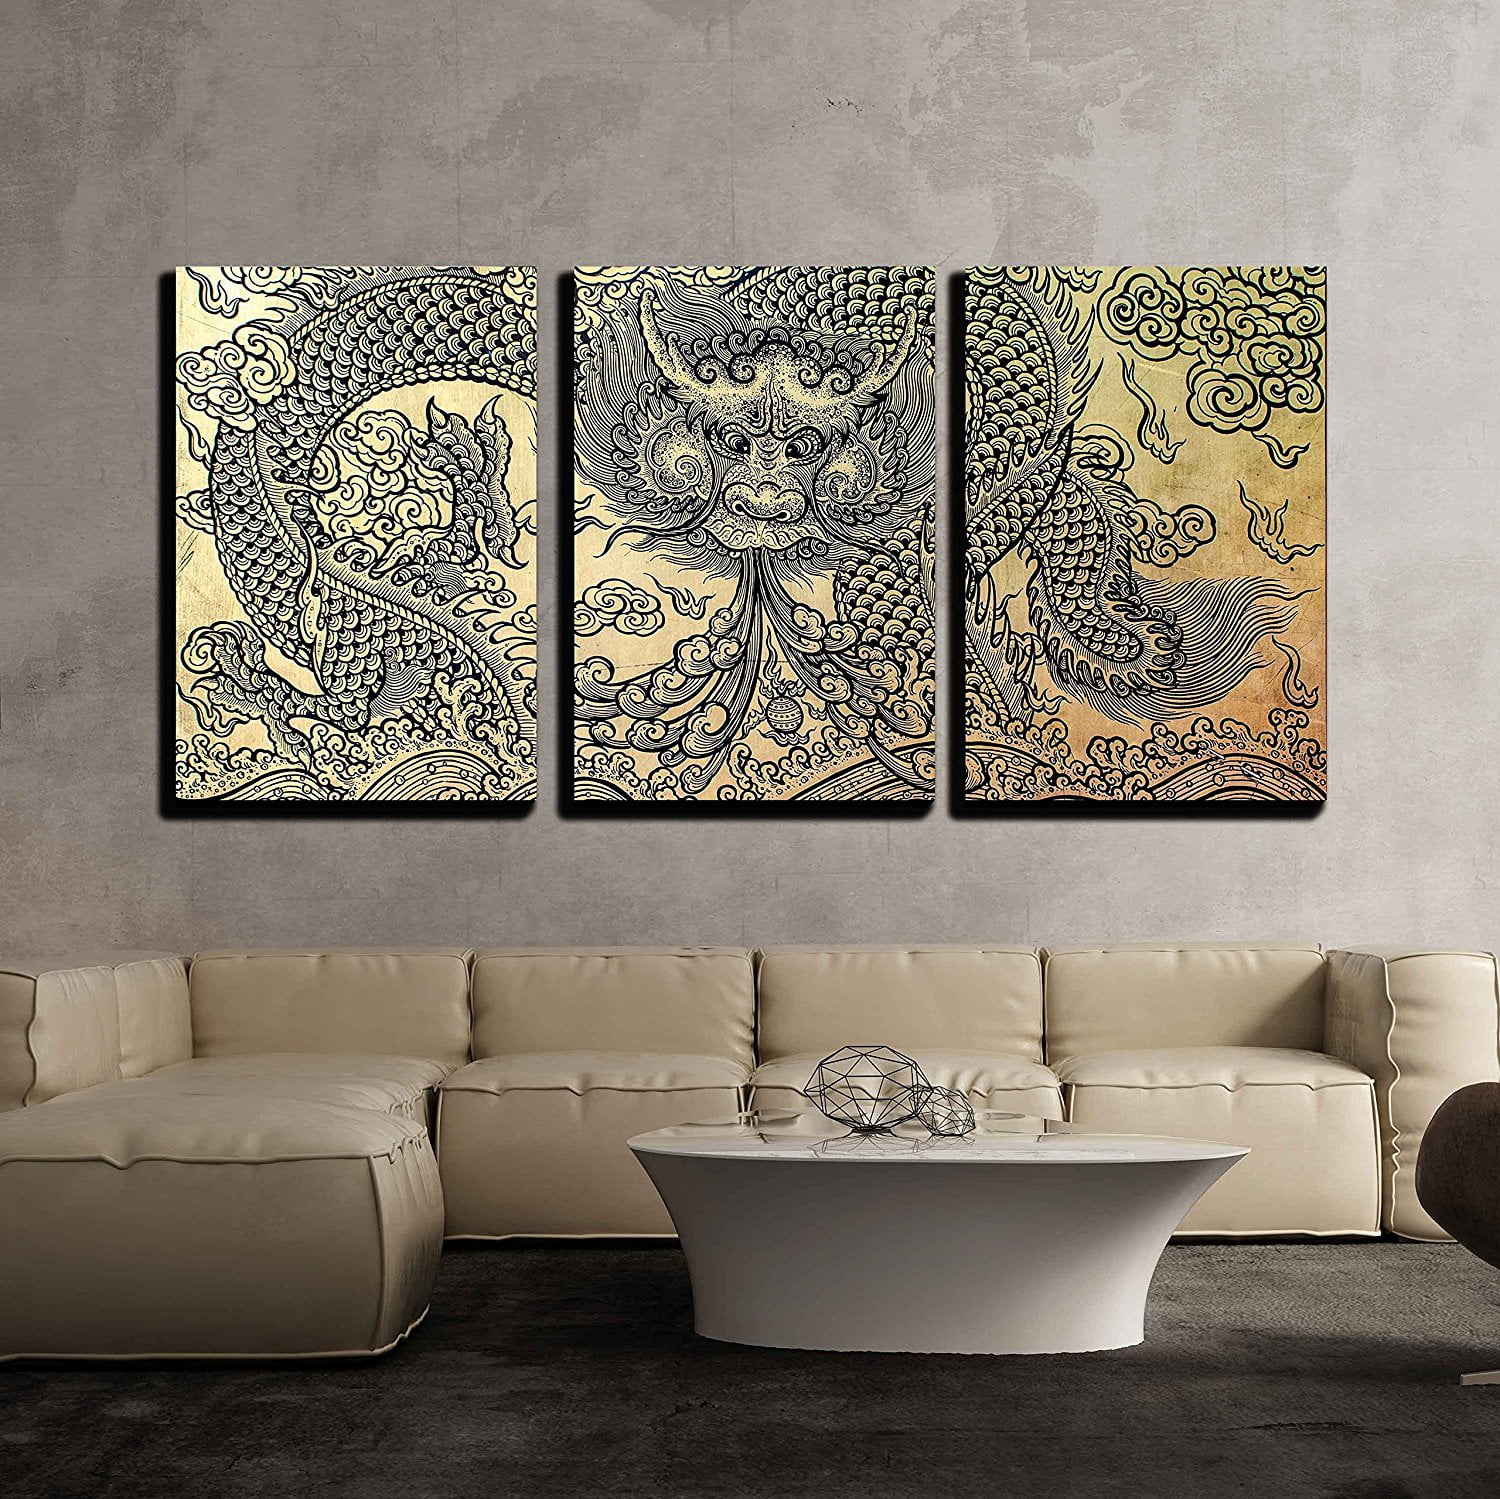 5 Panels Unframed Dragon Canvas Art Oil Painting Picture Wall Hanging Decor 